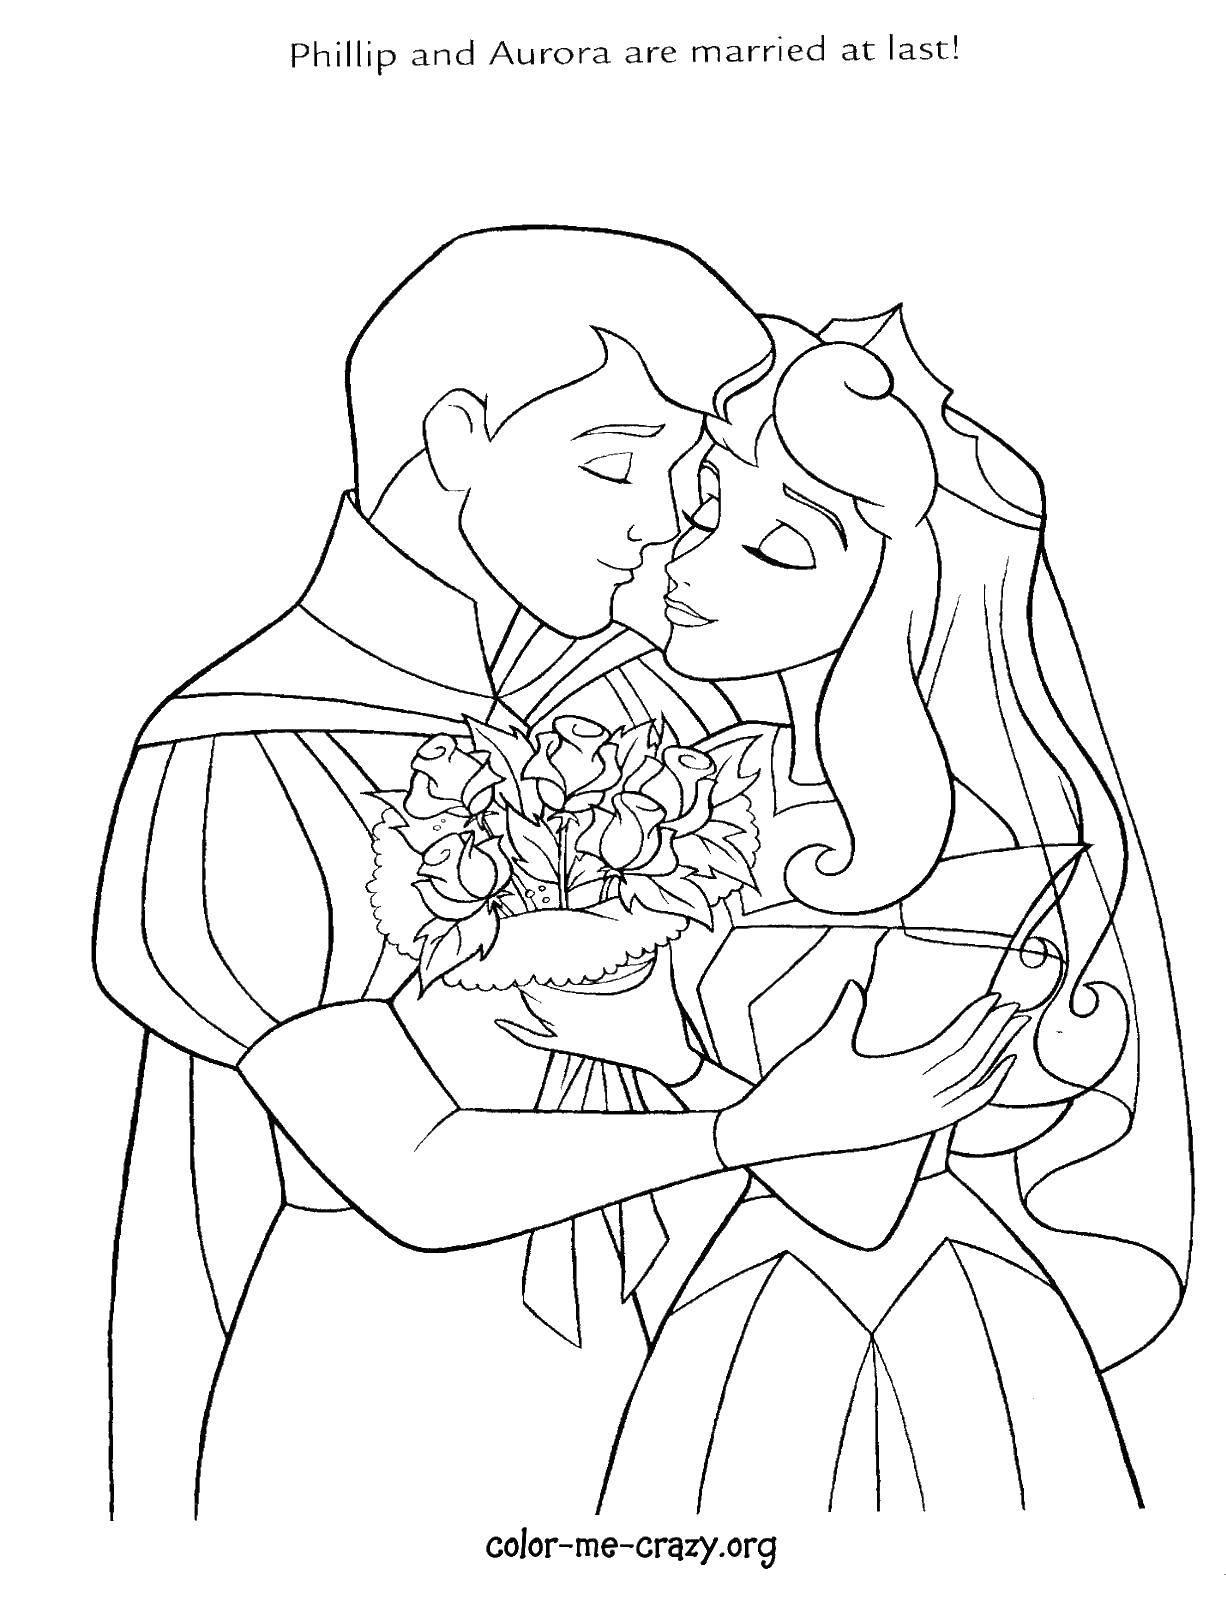 Coloring Phillip and Aurora were married. Category Wedding. Tags:  wedding, Prince, Princess, Aurora.